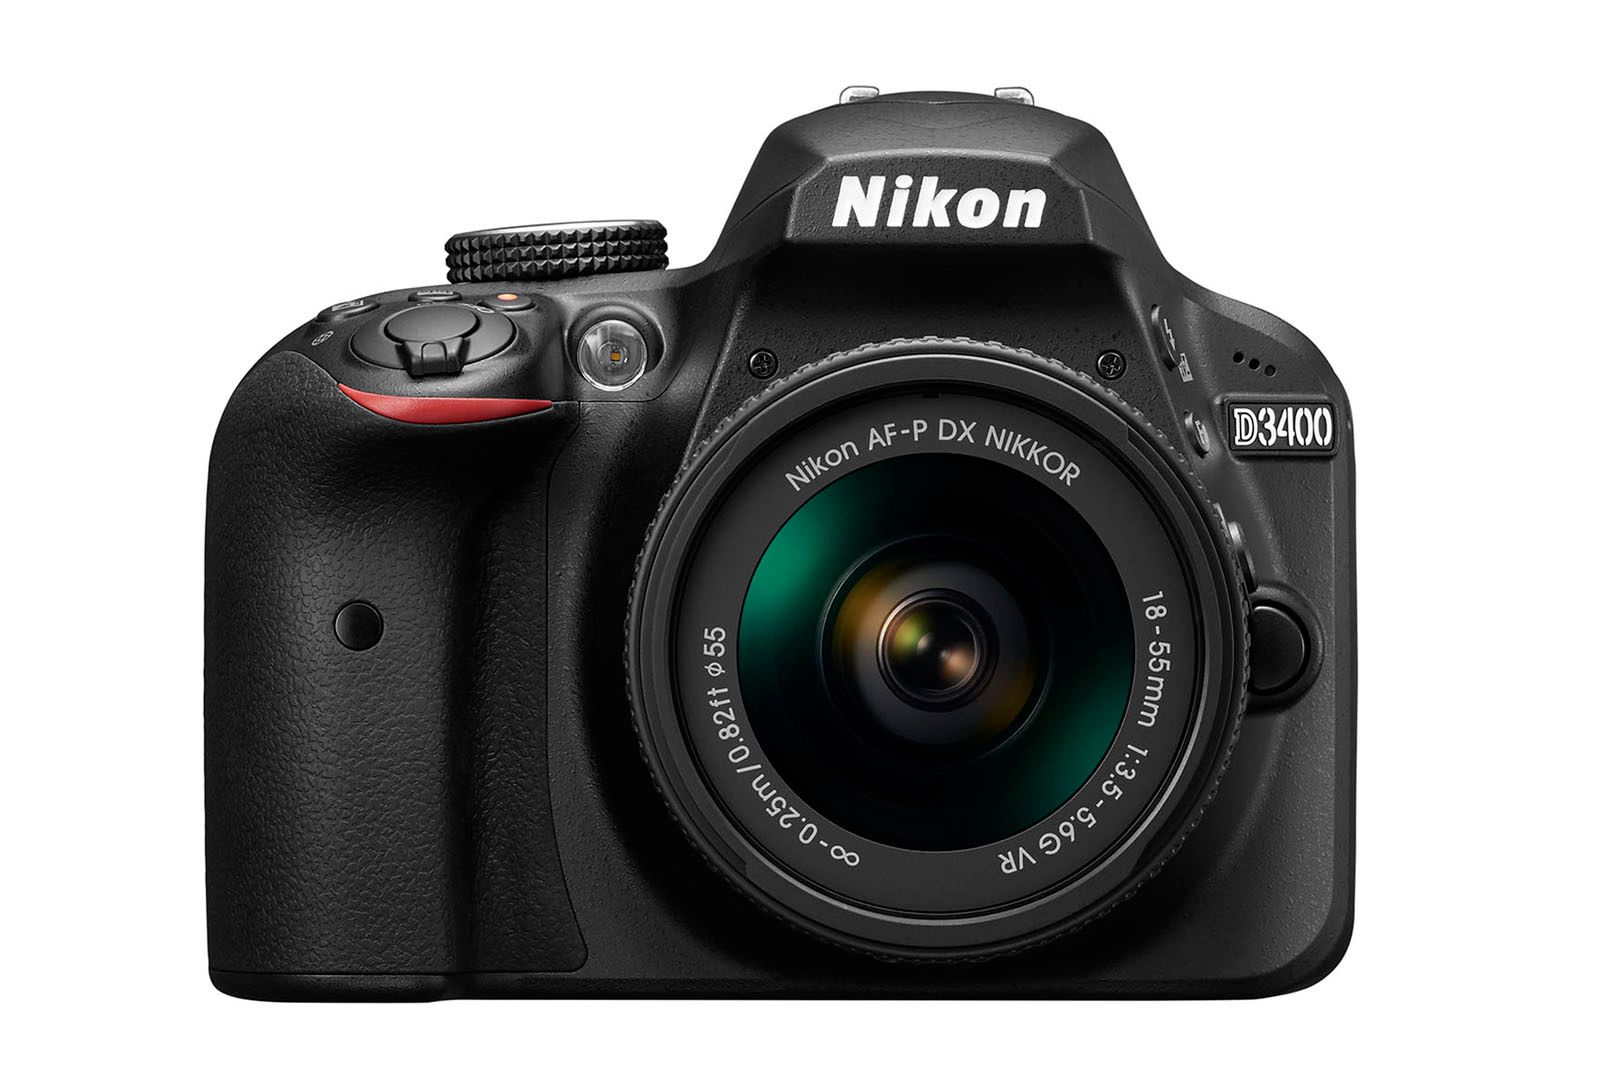 nikon d3400 updates entry level dslr with bluetooth for instant smartphone sharing image 1